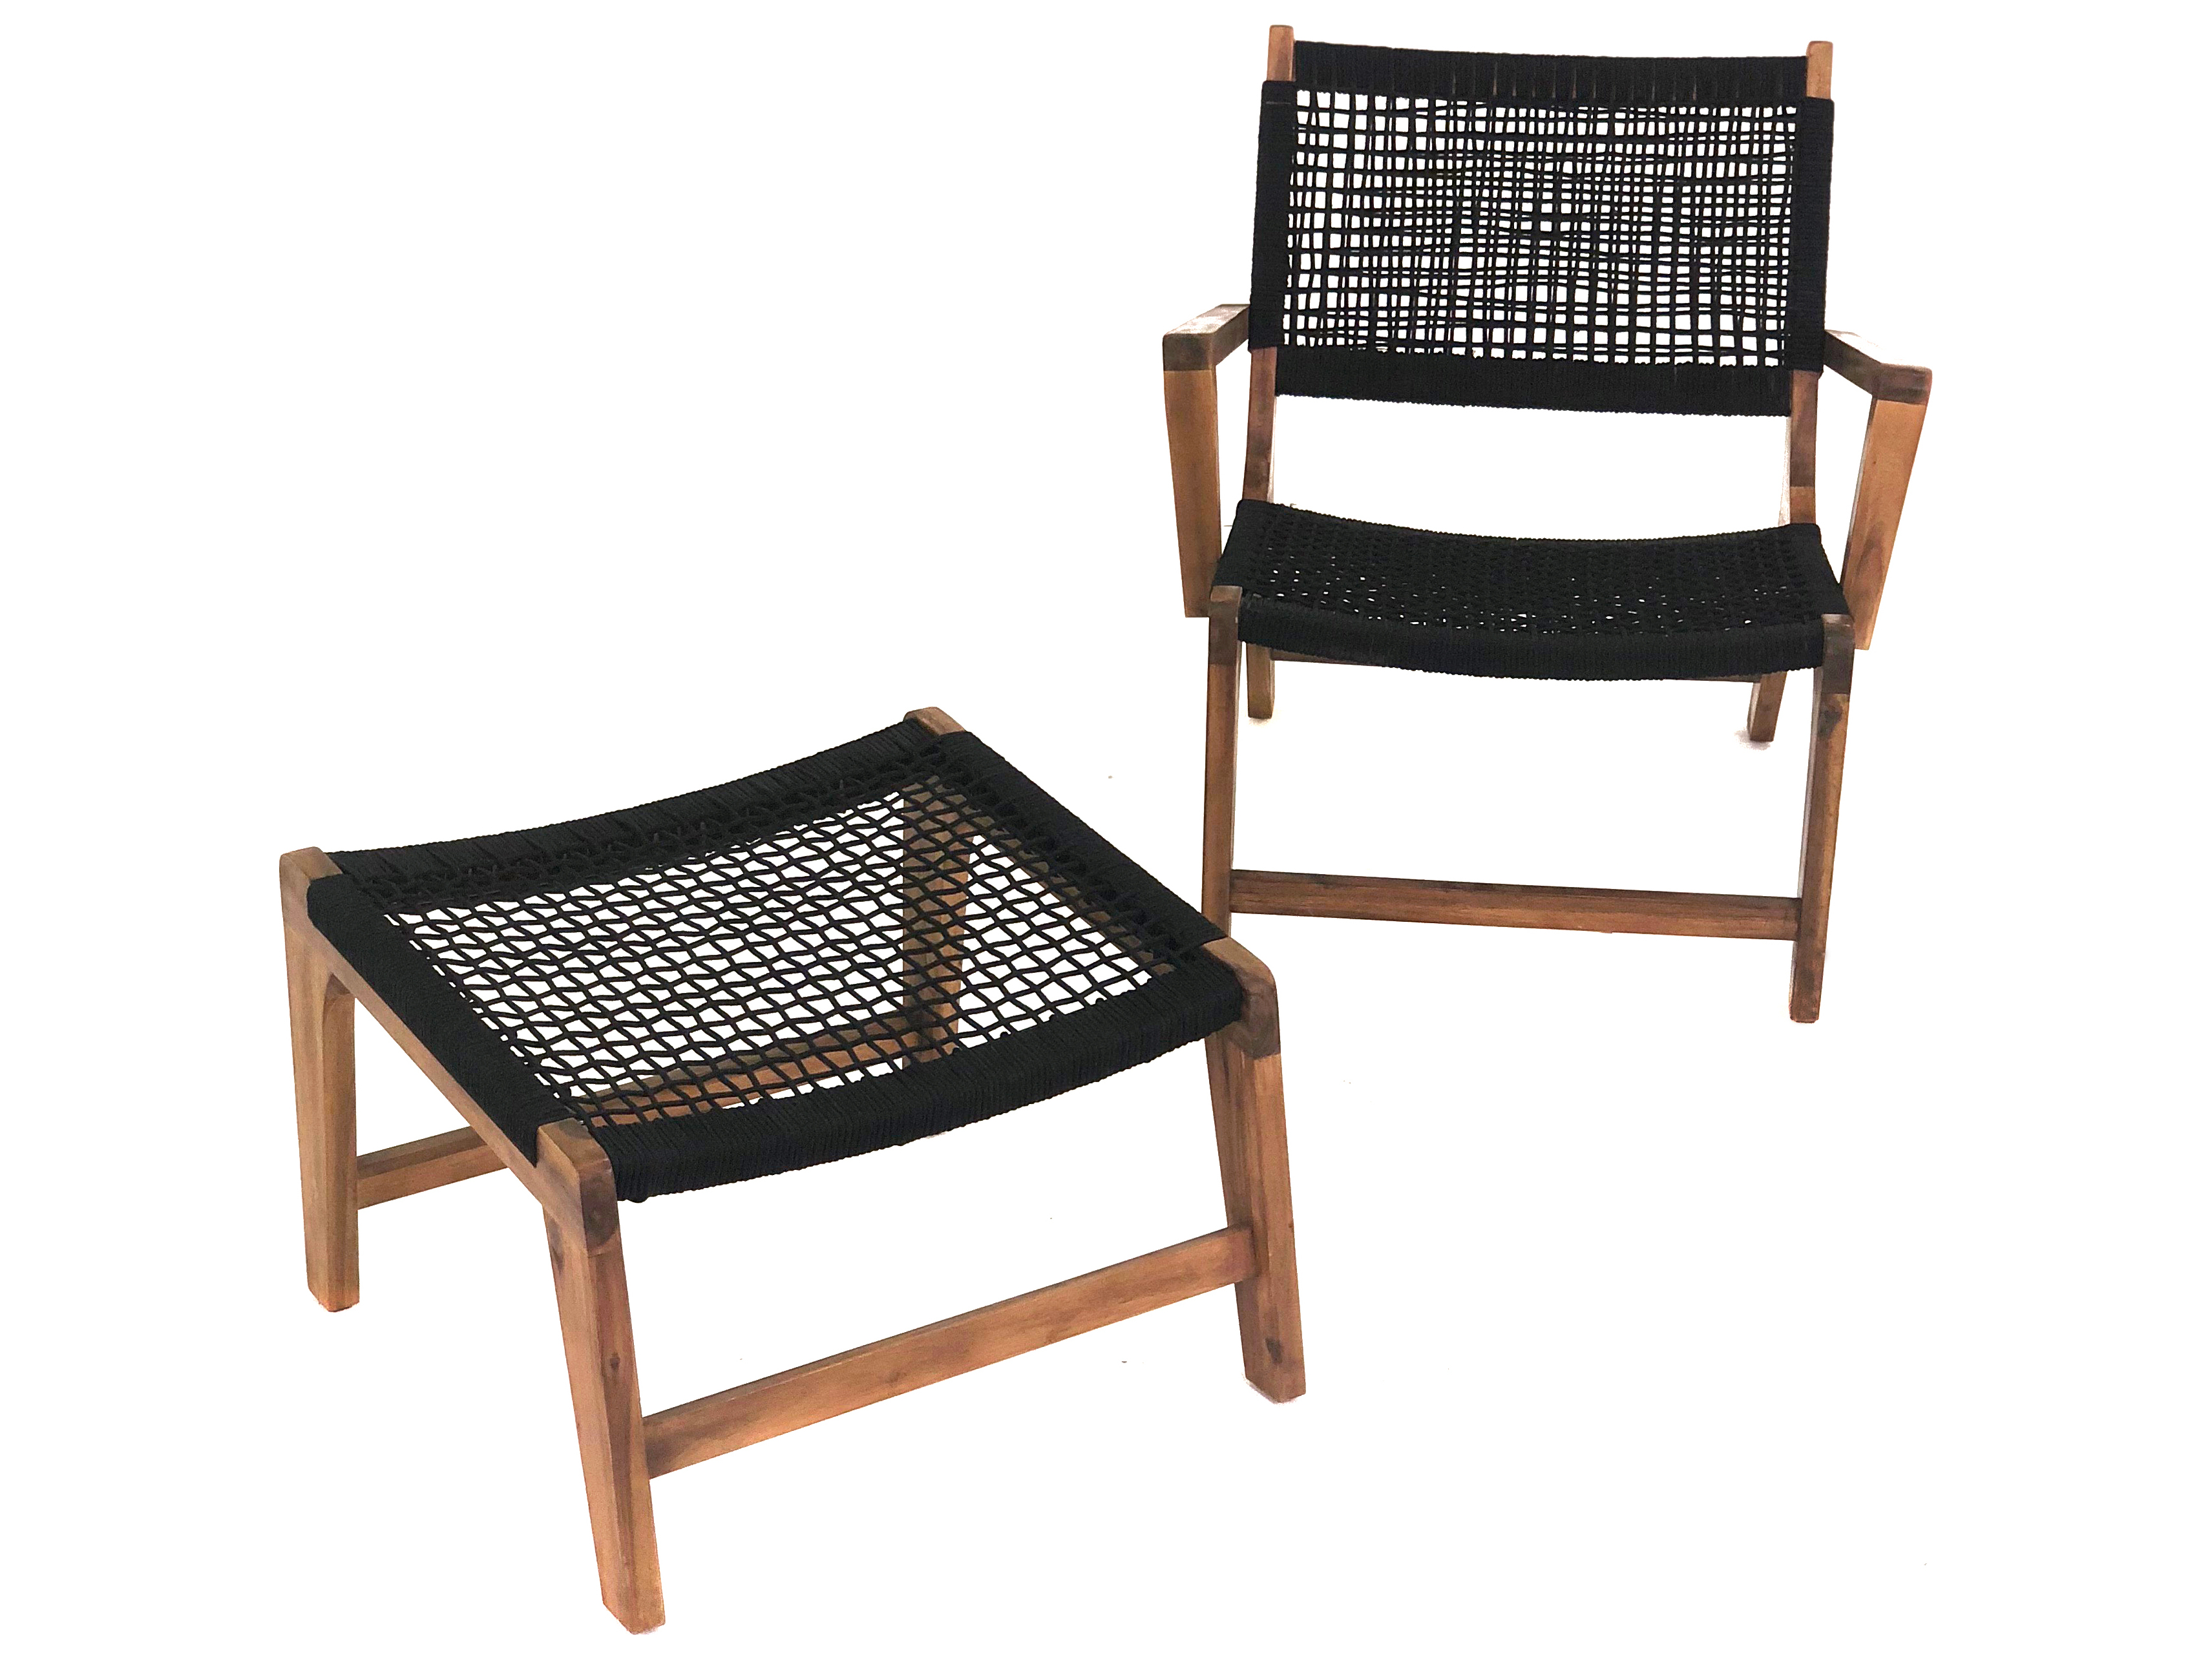 outdoor chair with footrest